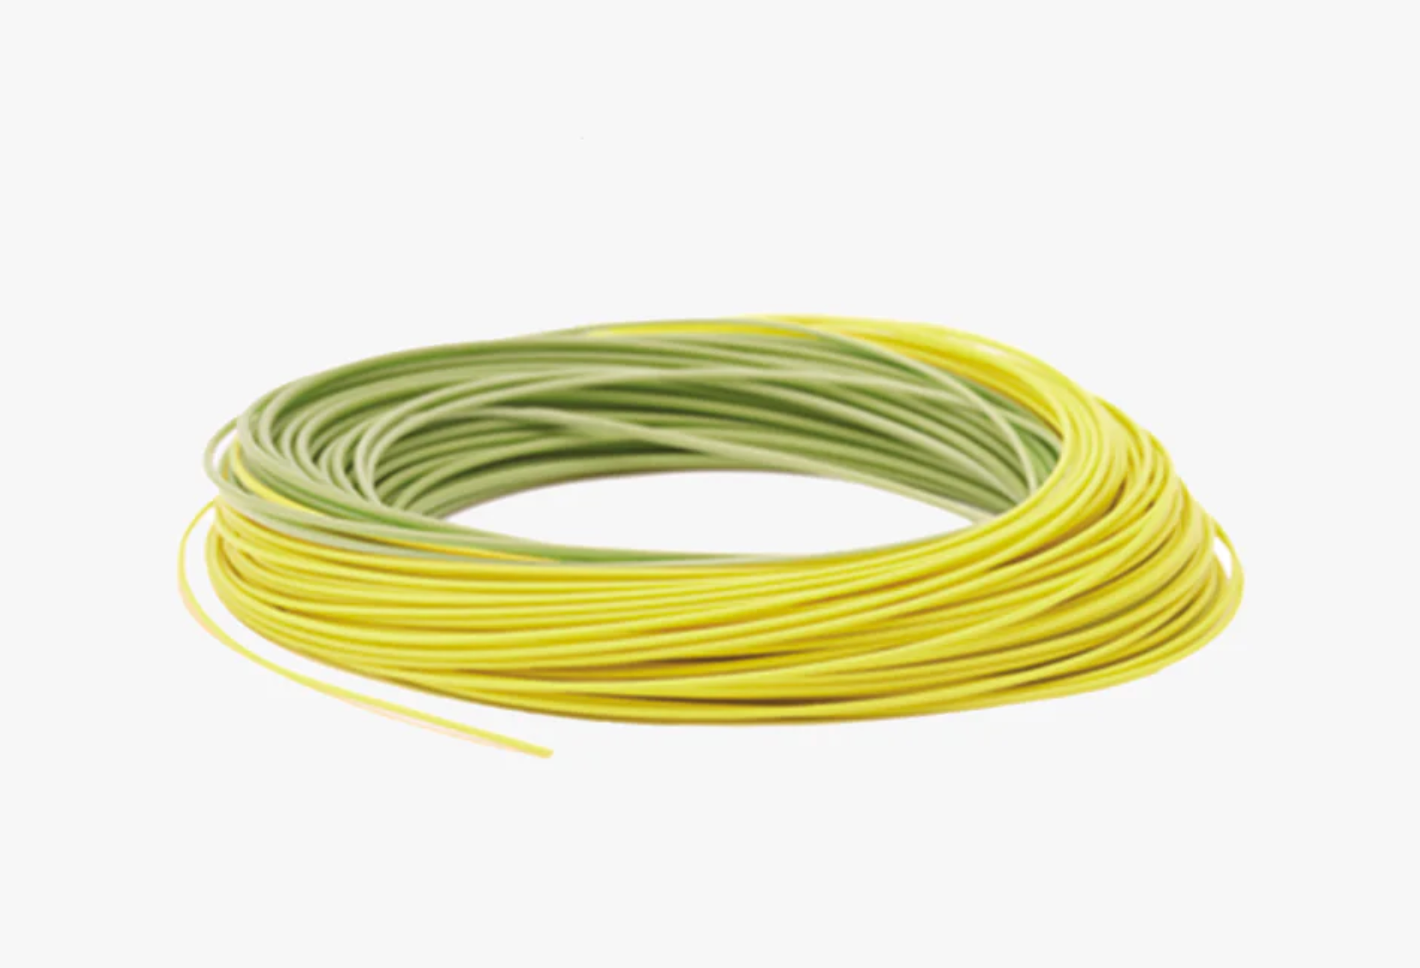 Rio Gold Premier Fly Line - Fly Fishing